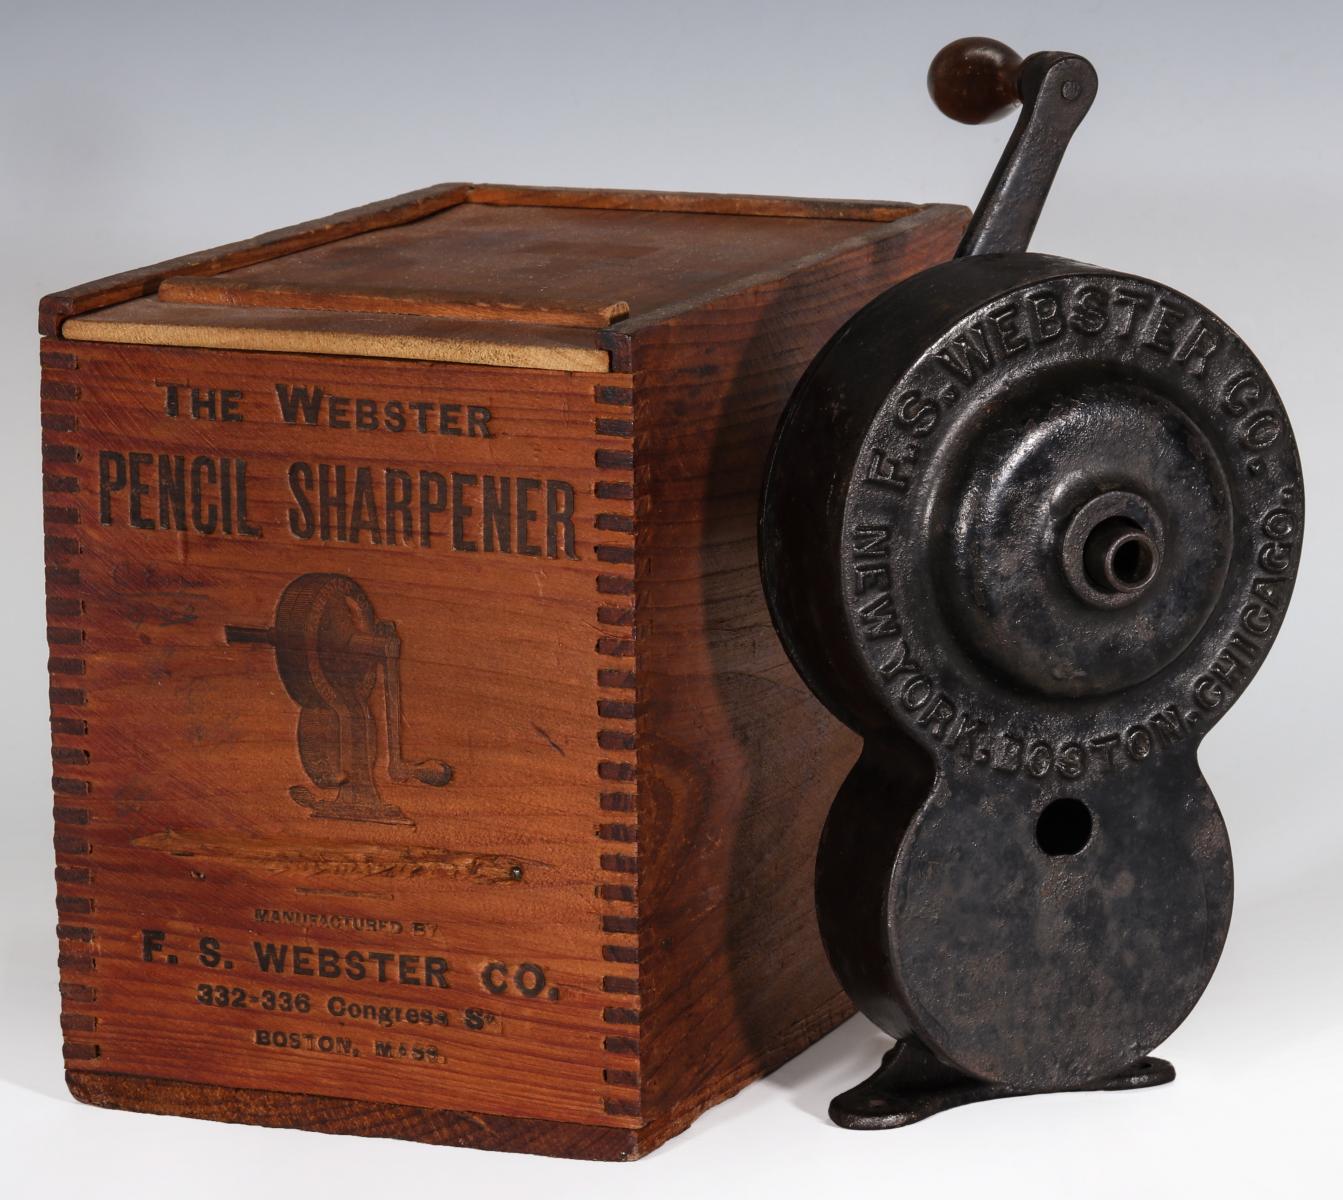 F.S. WEBSTER IRON PENCIL SHARPENER IN BOX C. 1890